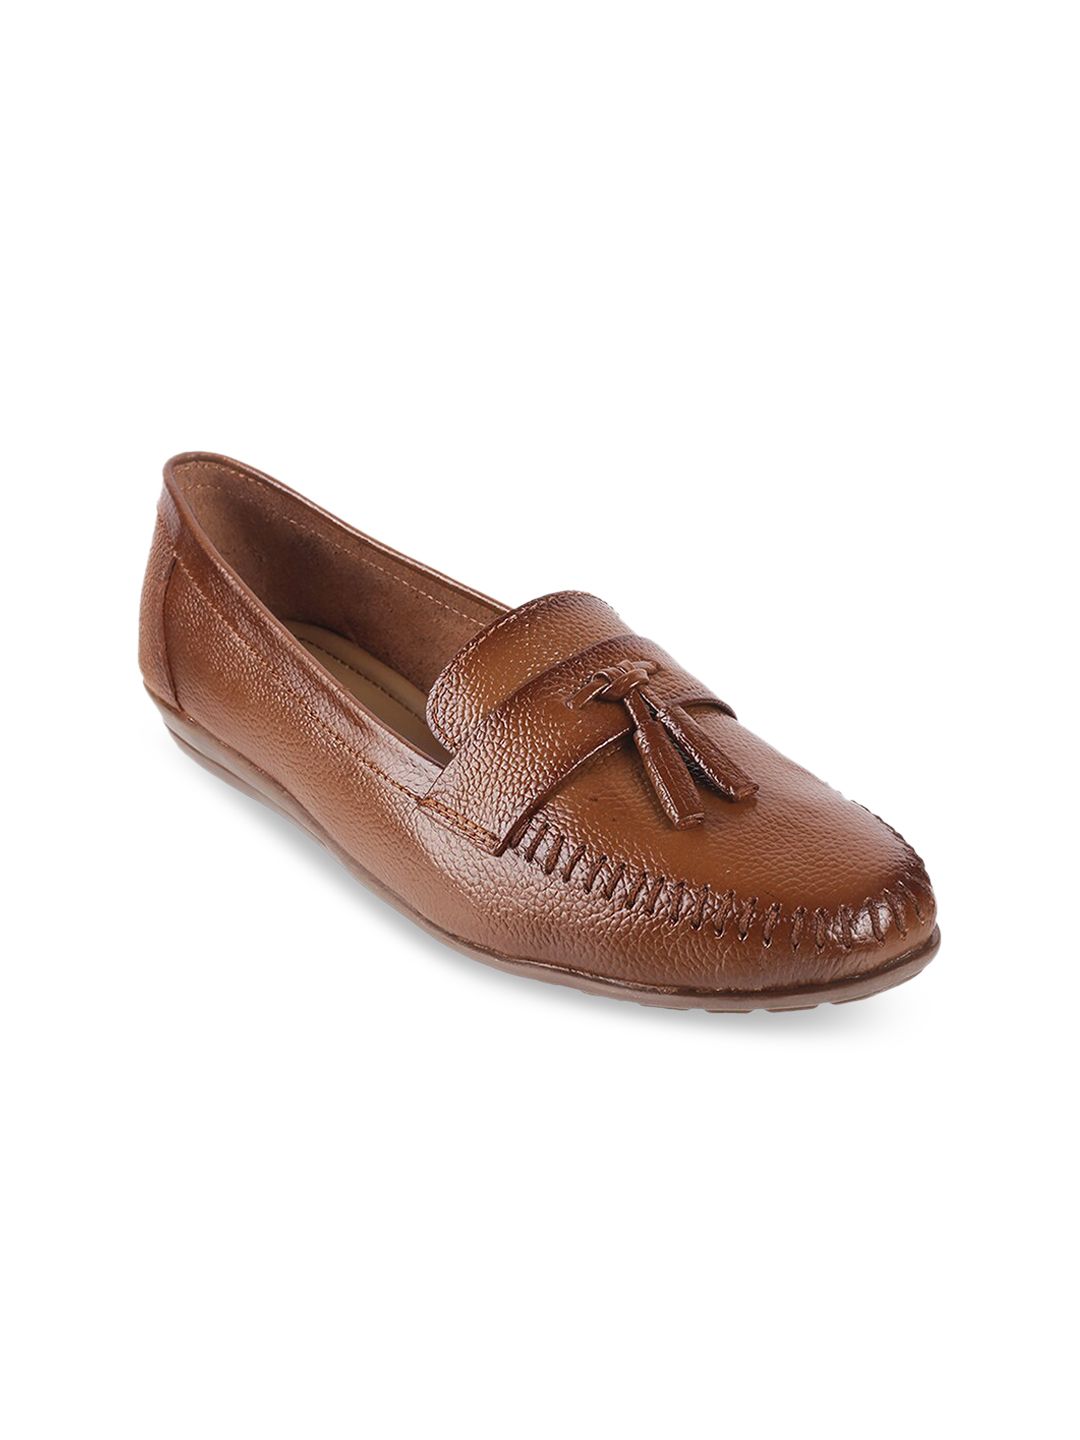 Metro Women Rust Ballerinas with Bows Flats Price in India